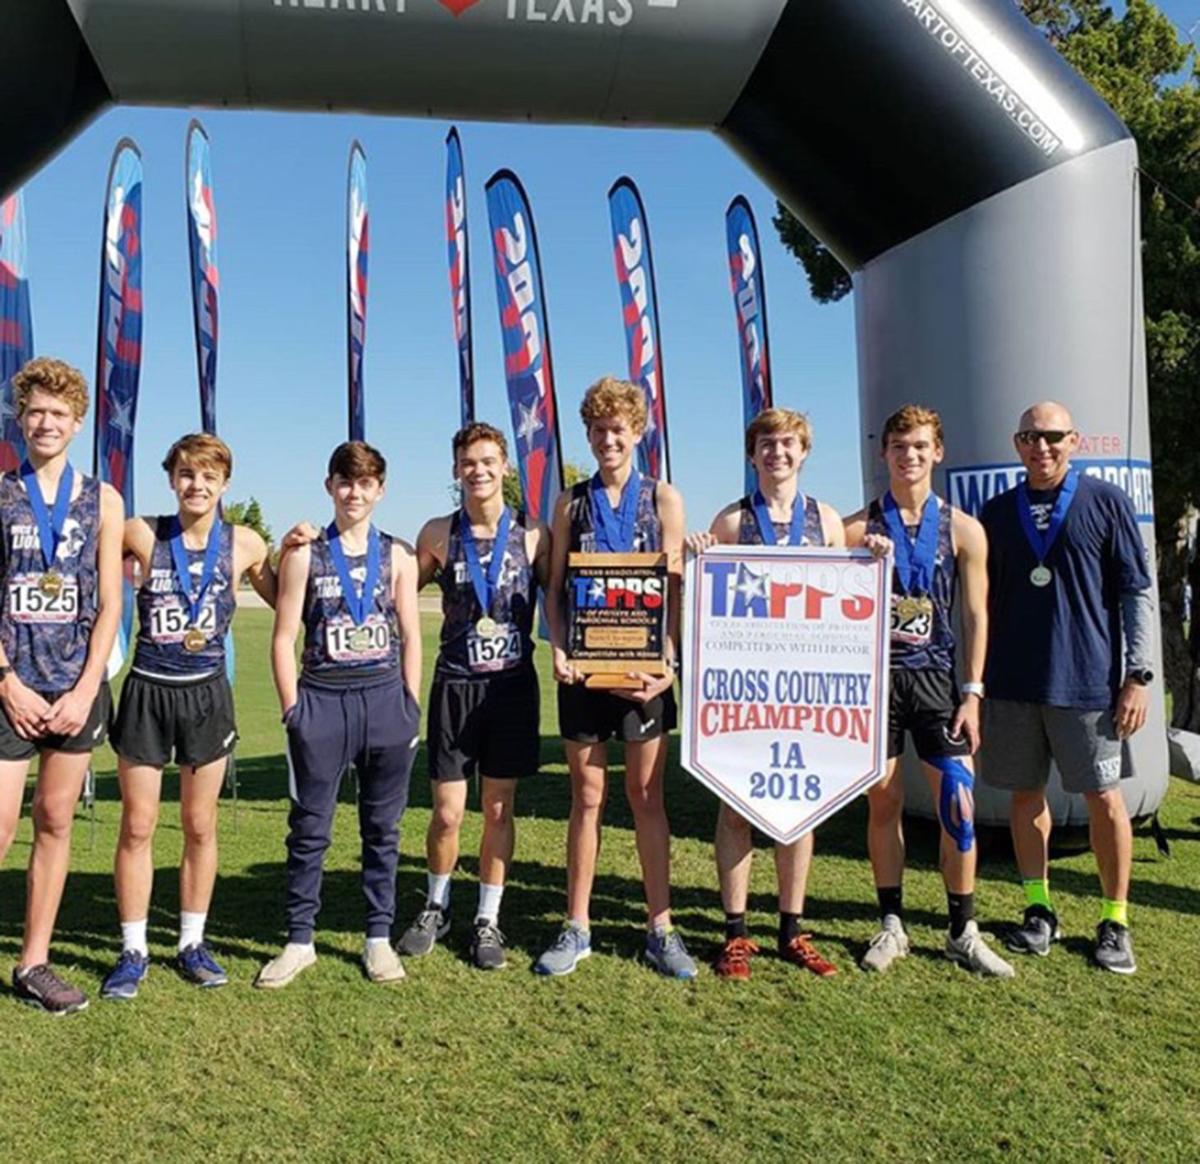 Lions claim top spot at state XC meet Sports